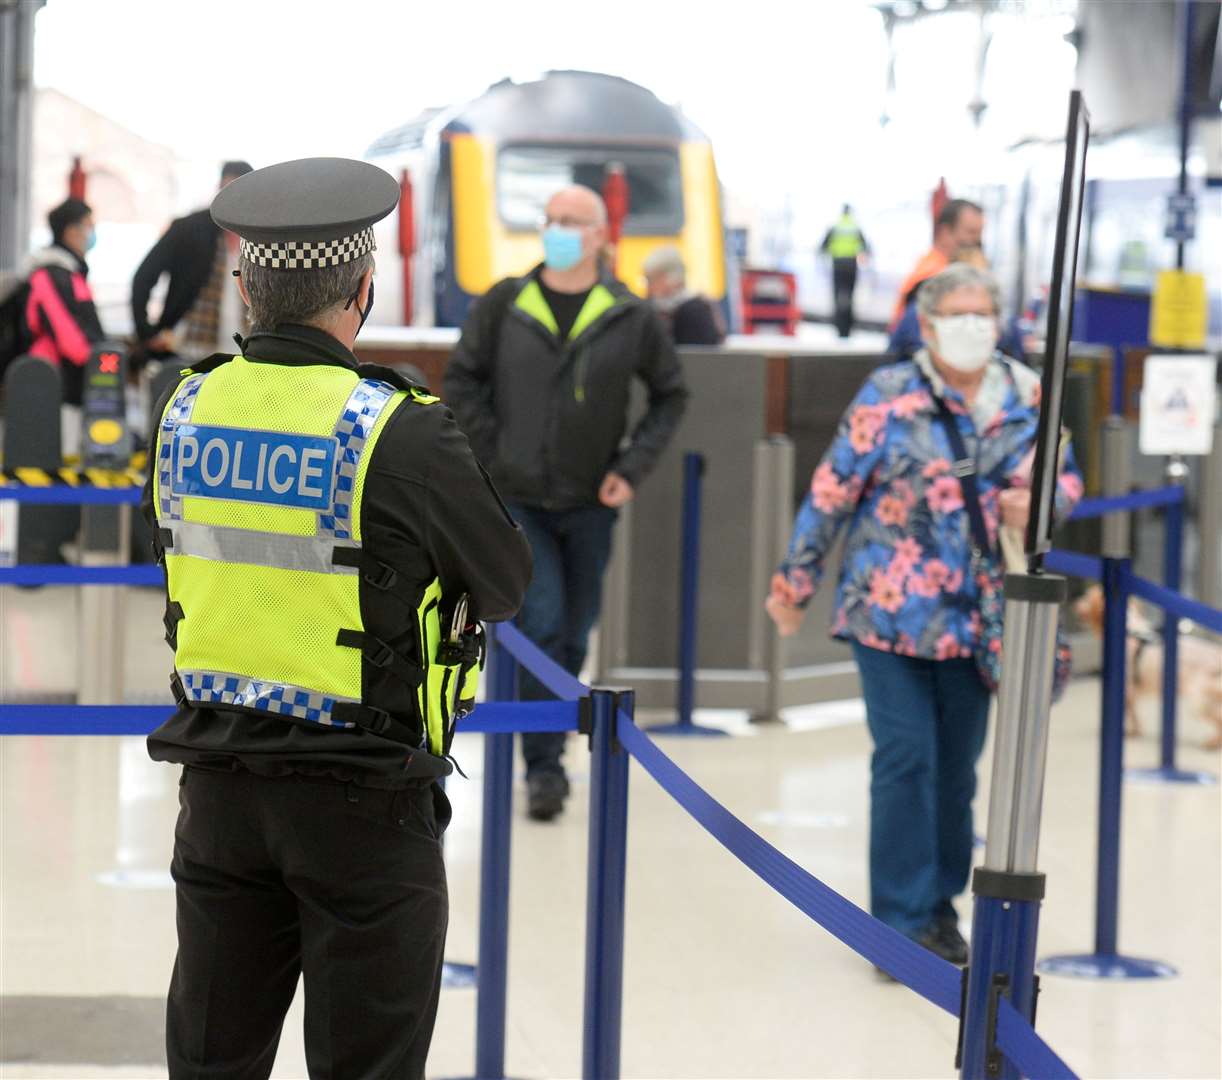 Police officers were visible at Inverness rail station during a day of action targeting drug traffickers – an issue highlighted by Chief Supt Conrad Trickett.